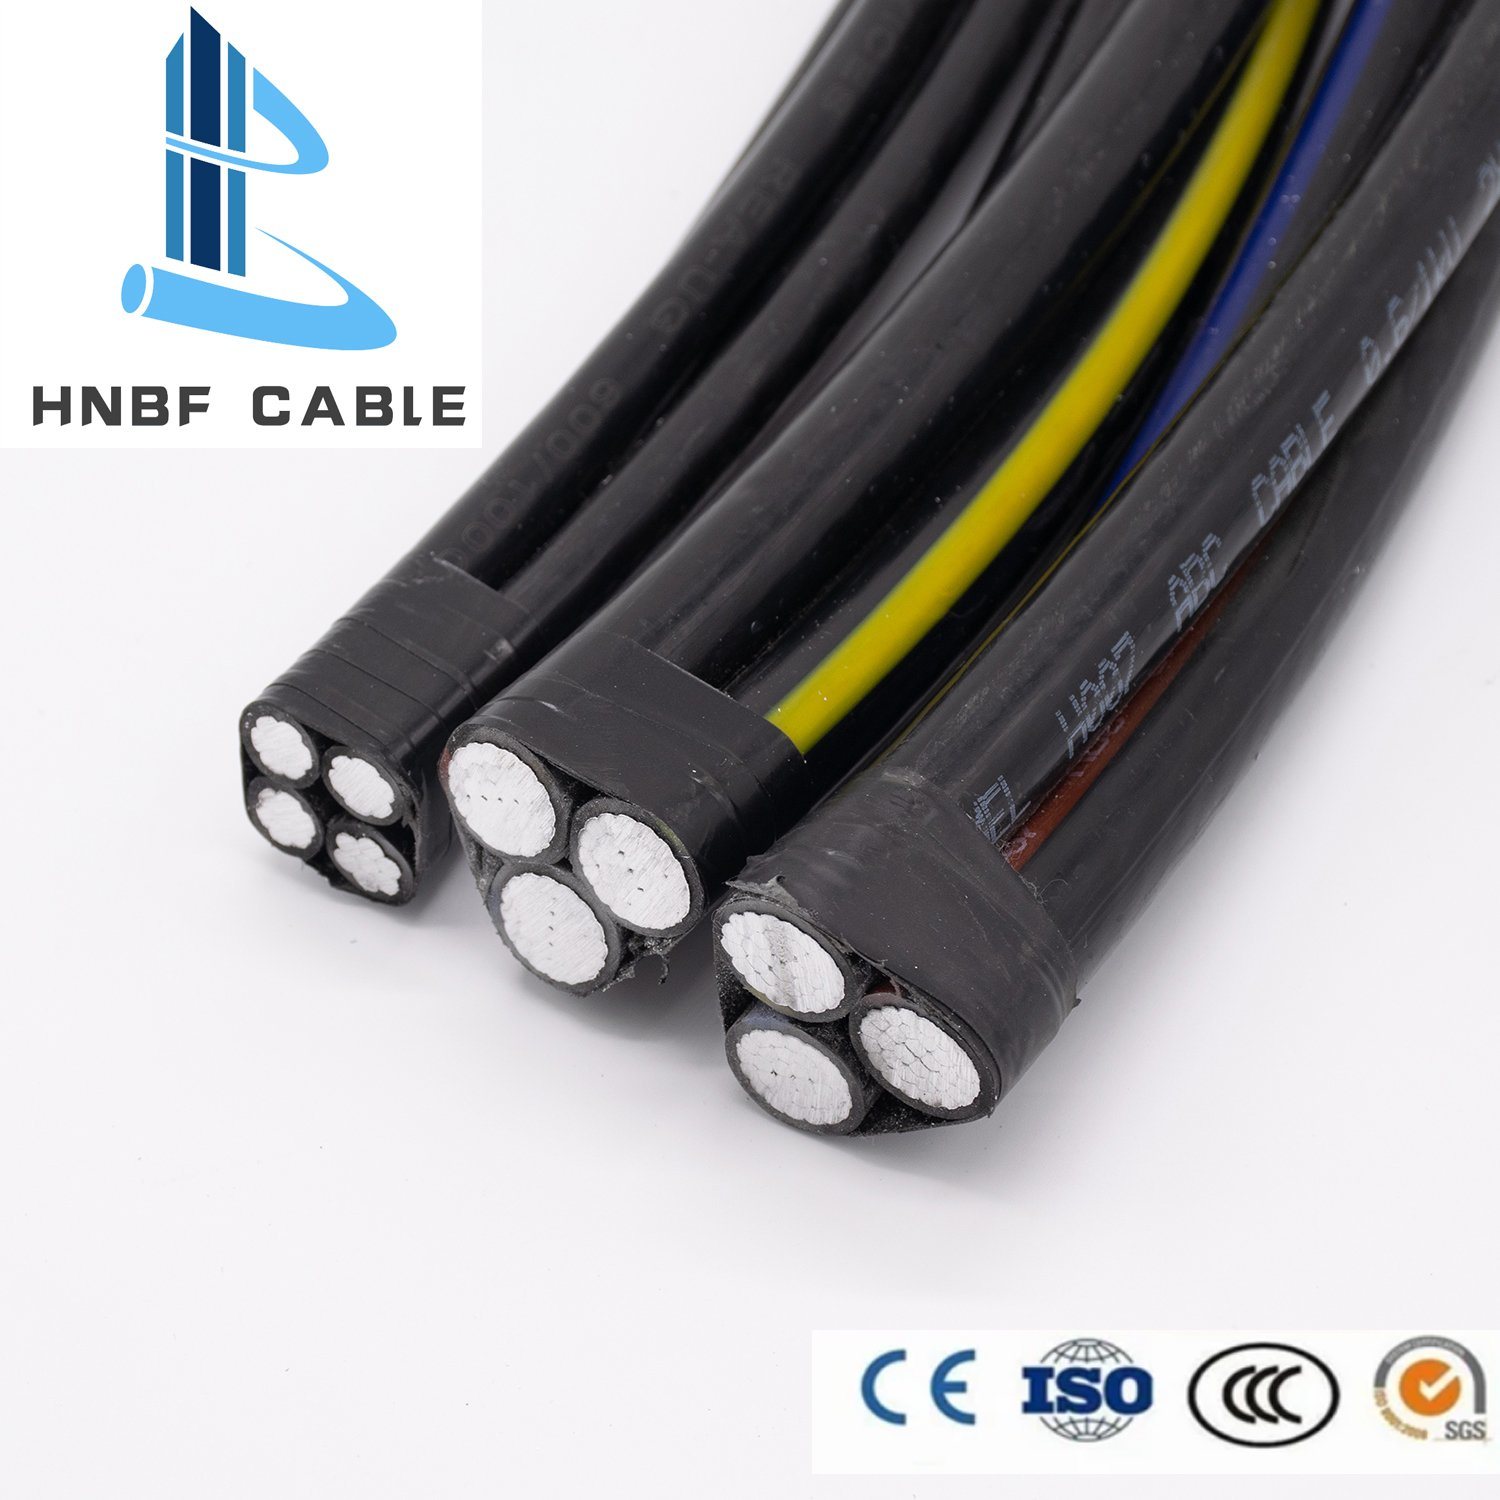 
                        ABC Cable with Sizes 10mm2 16mm2 25mm2 35mm2 50mm2 70mm2
                    